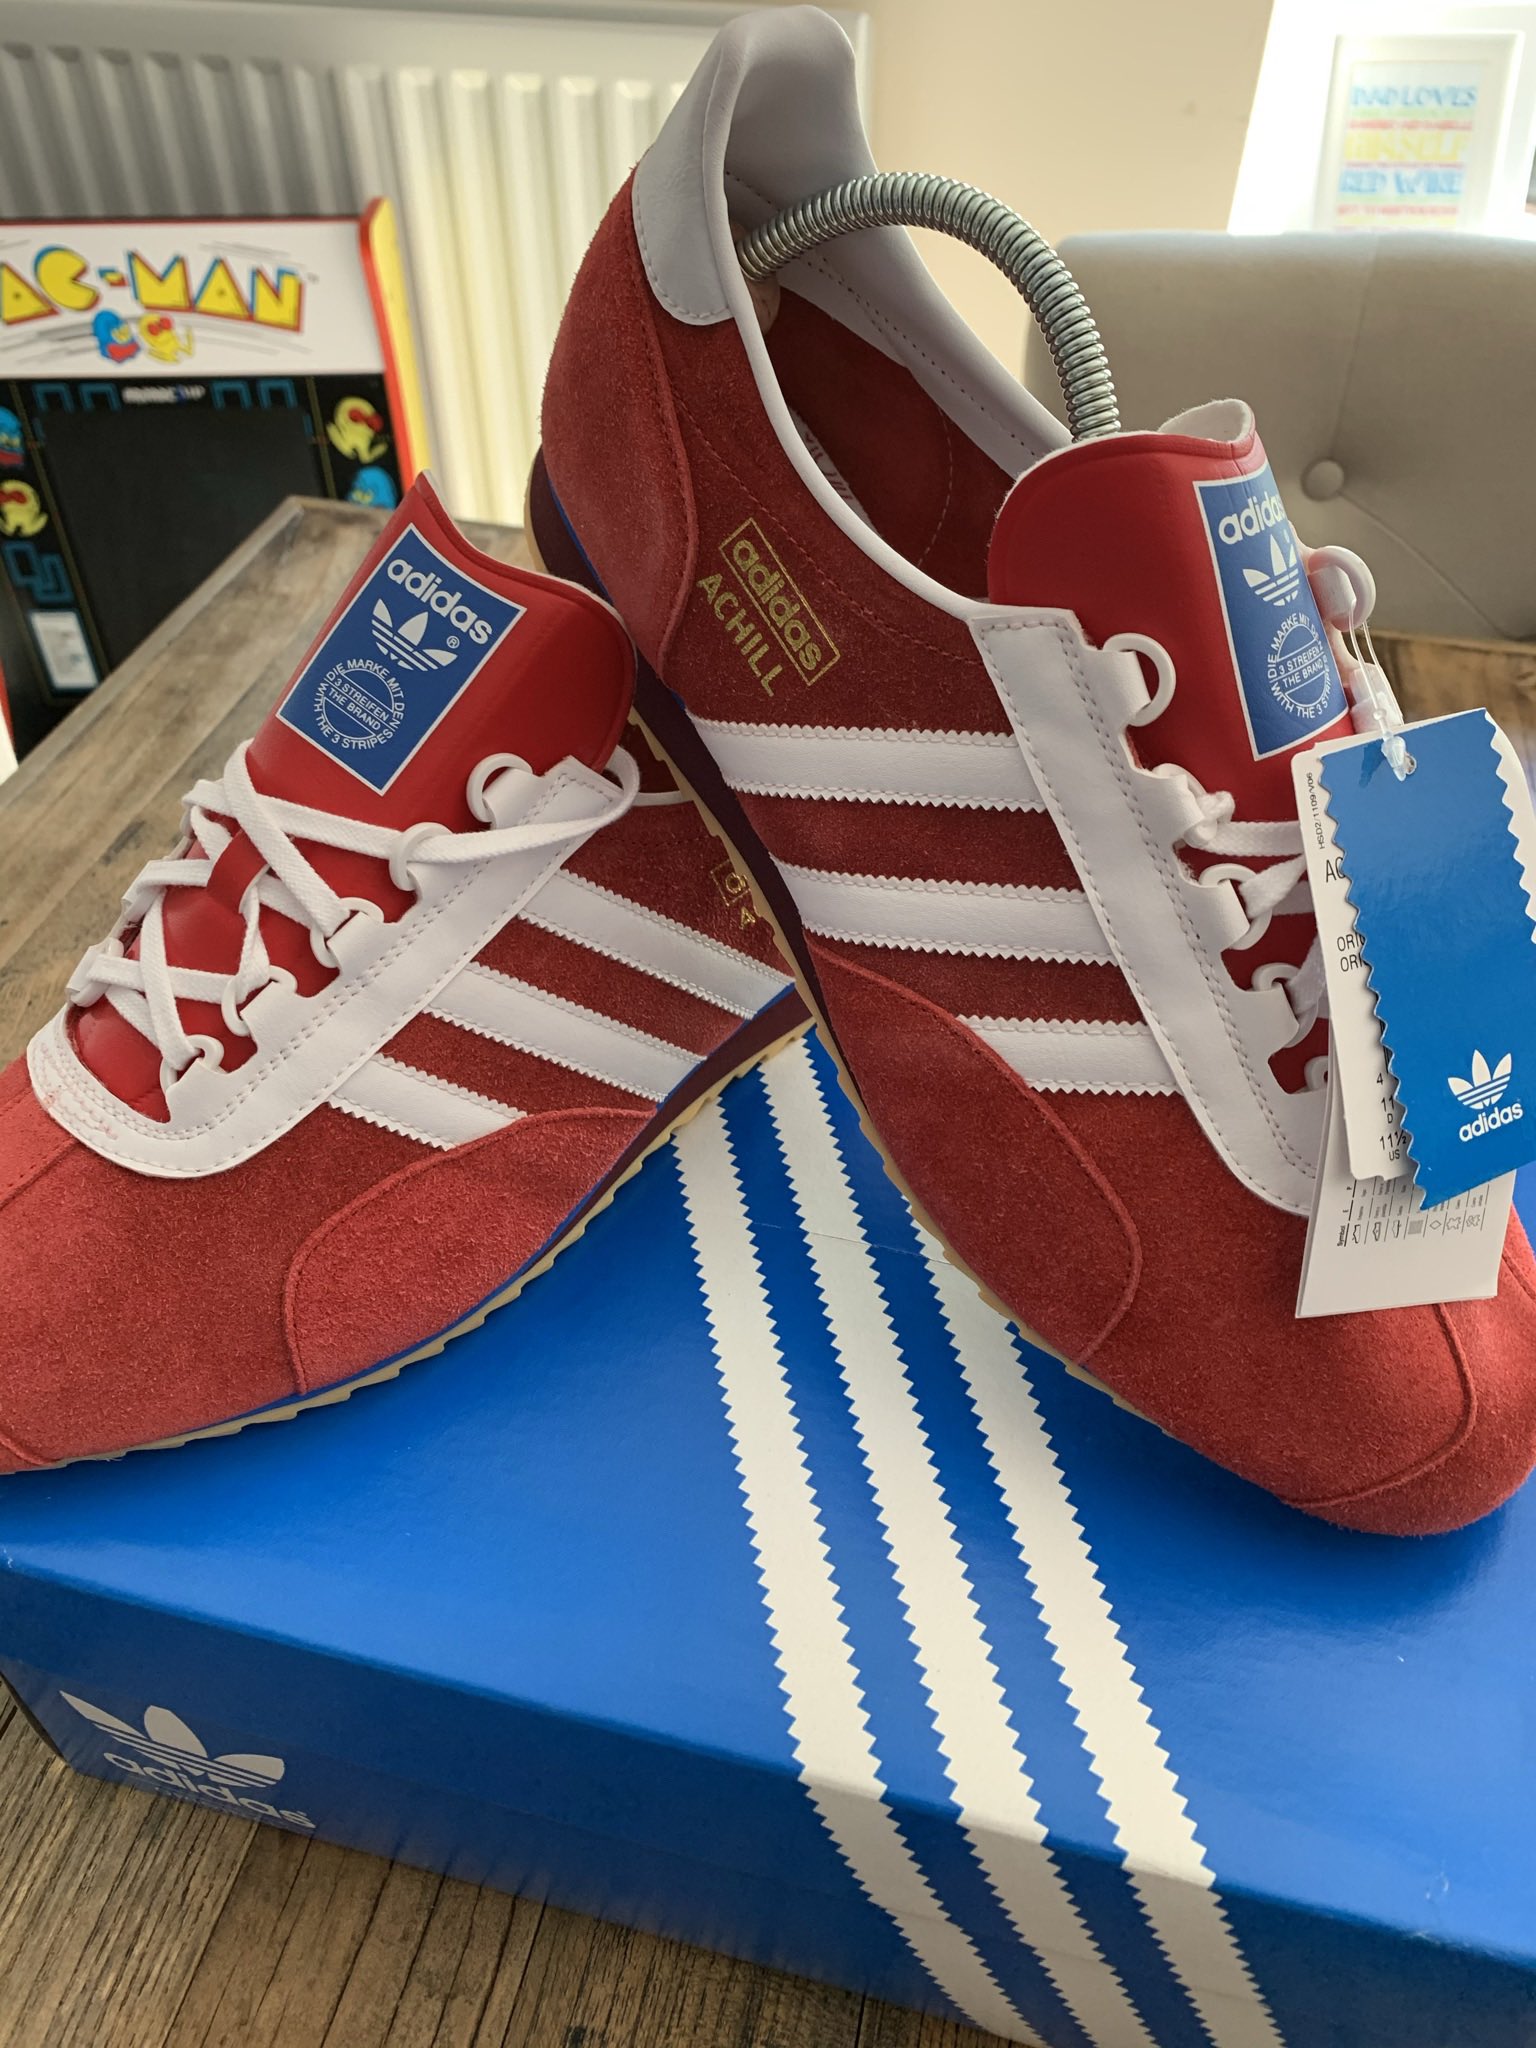 Acusador operador aterrizaje Gary Dale on Twitter: "#adidas #Adifamily #adidasoriginals  #shareyourstripes @MindBodySoleUK Weekend fun! Post a pic of your favourite  trabbs on here, let's see a great collection on here by Sunday!  @3StripesAdam @hirdy1888 @CraigE1903 @